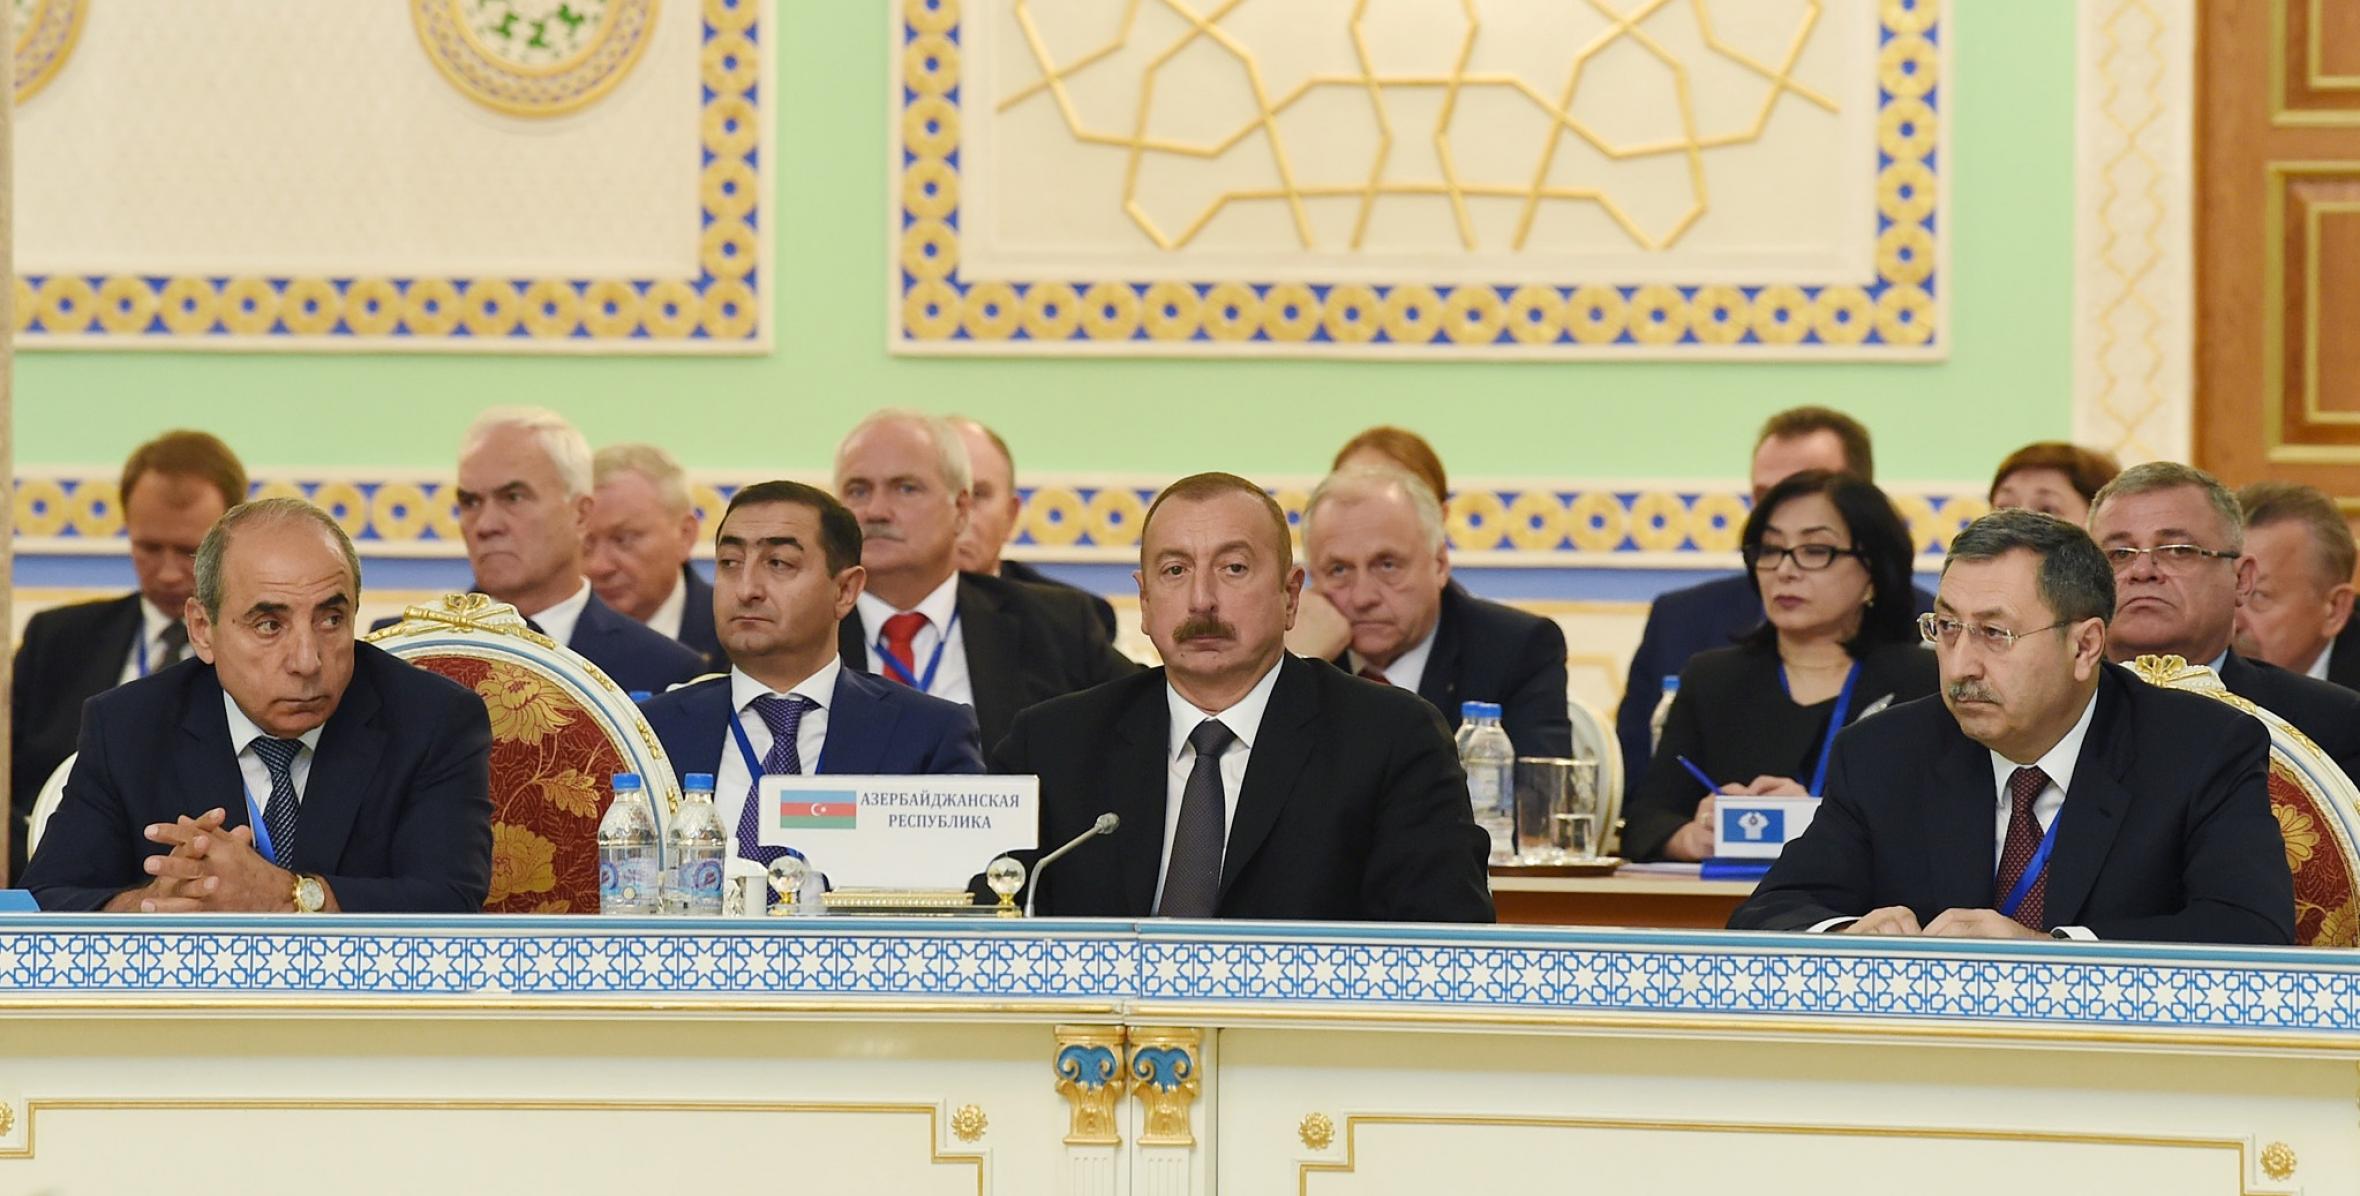 Ilham Aliyev attended expanded session of CIS Council of Heads of State in Dushanbe